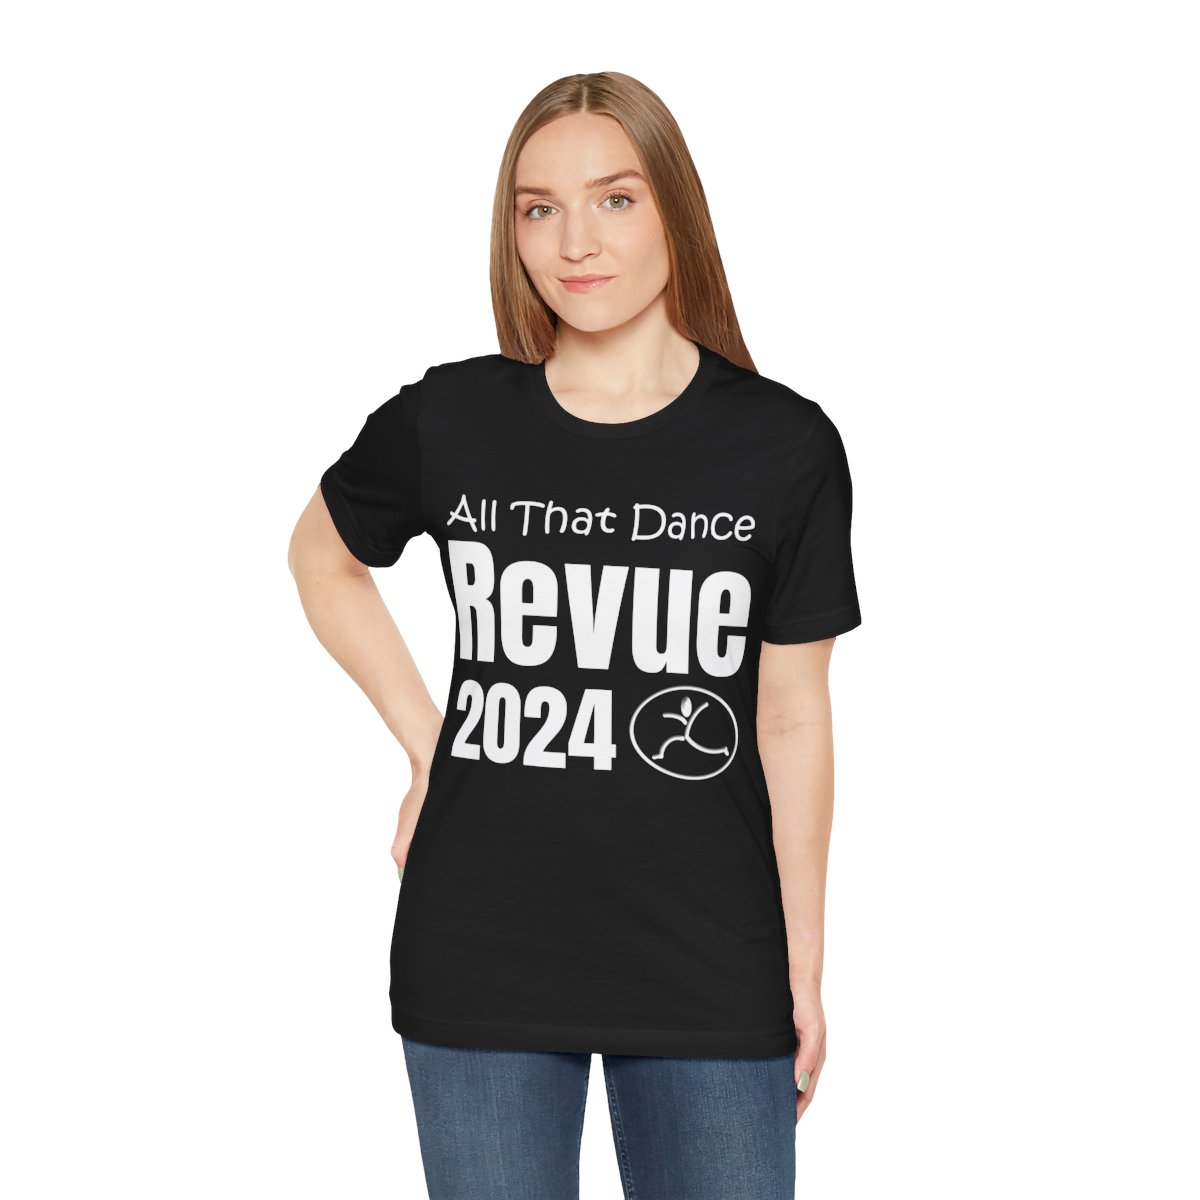 Adult Sizes - Two Sided All That Dance Revue 2023 Tshirt with Names on Back product thumbnail image